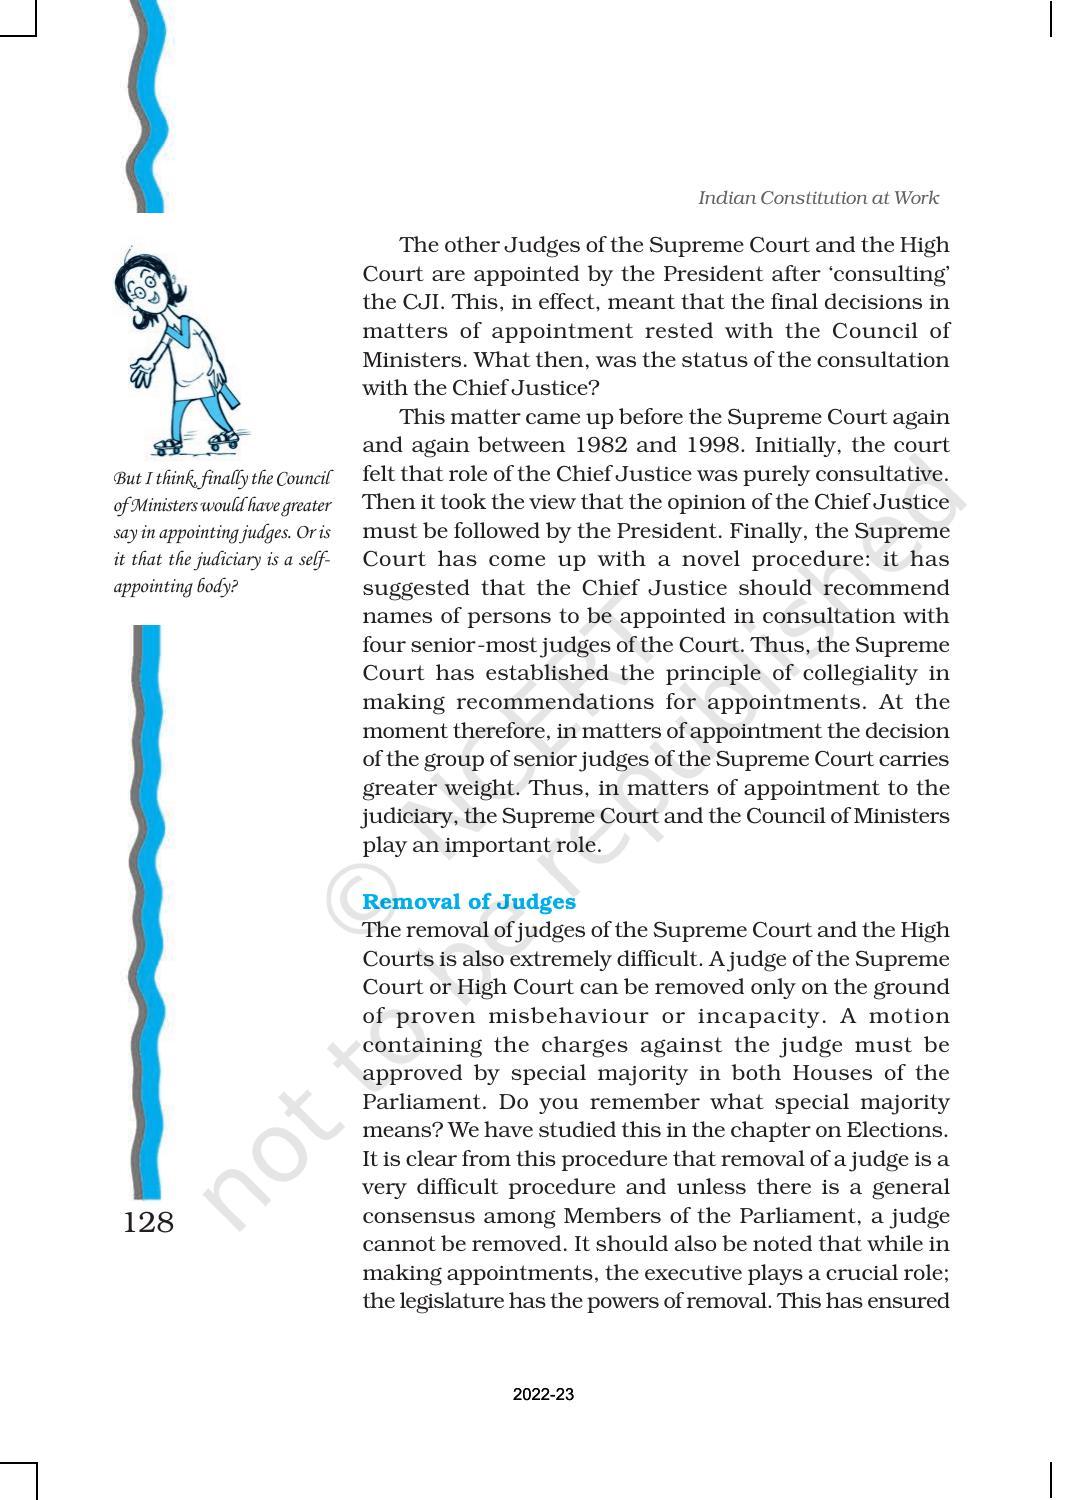 NCERT Book for Class 11 Political Science (Indian Constitution at Work) Chapter 6 Judiciary - Page 5